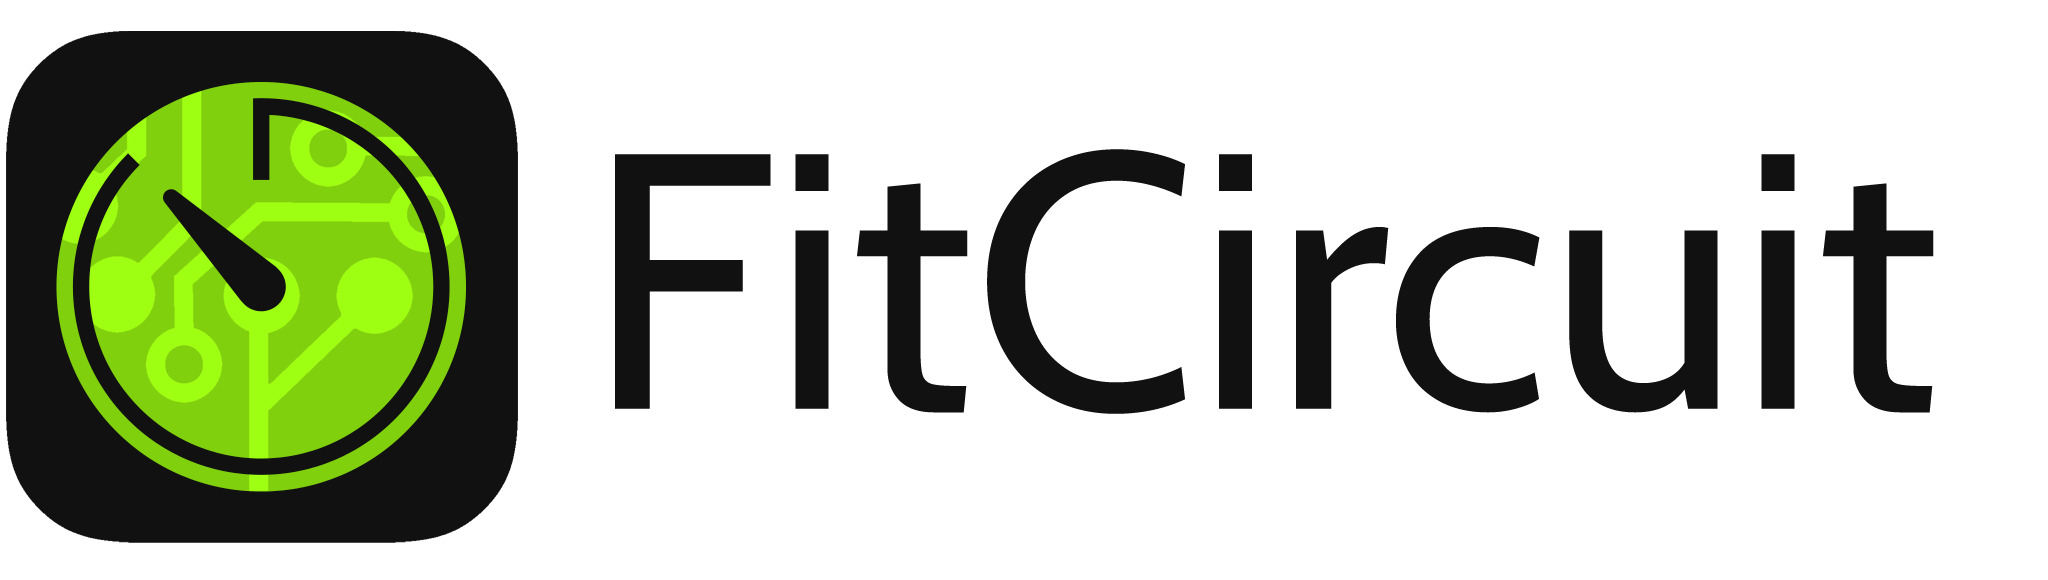 FiCircuit – Daily Circuit Training Workouts